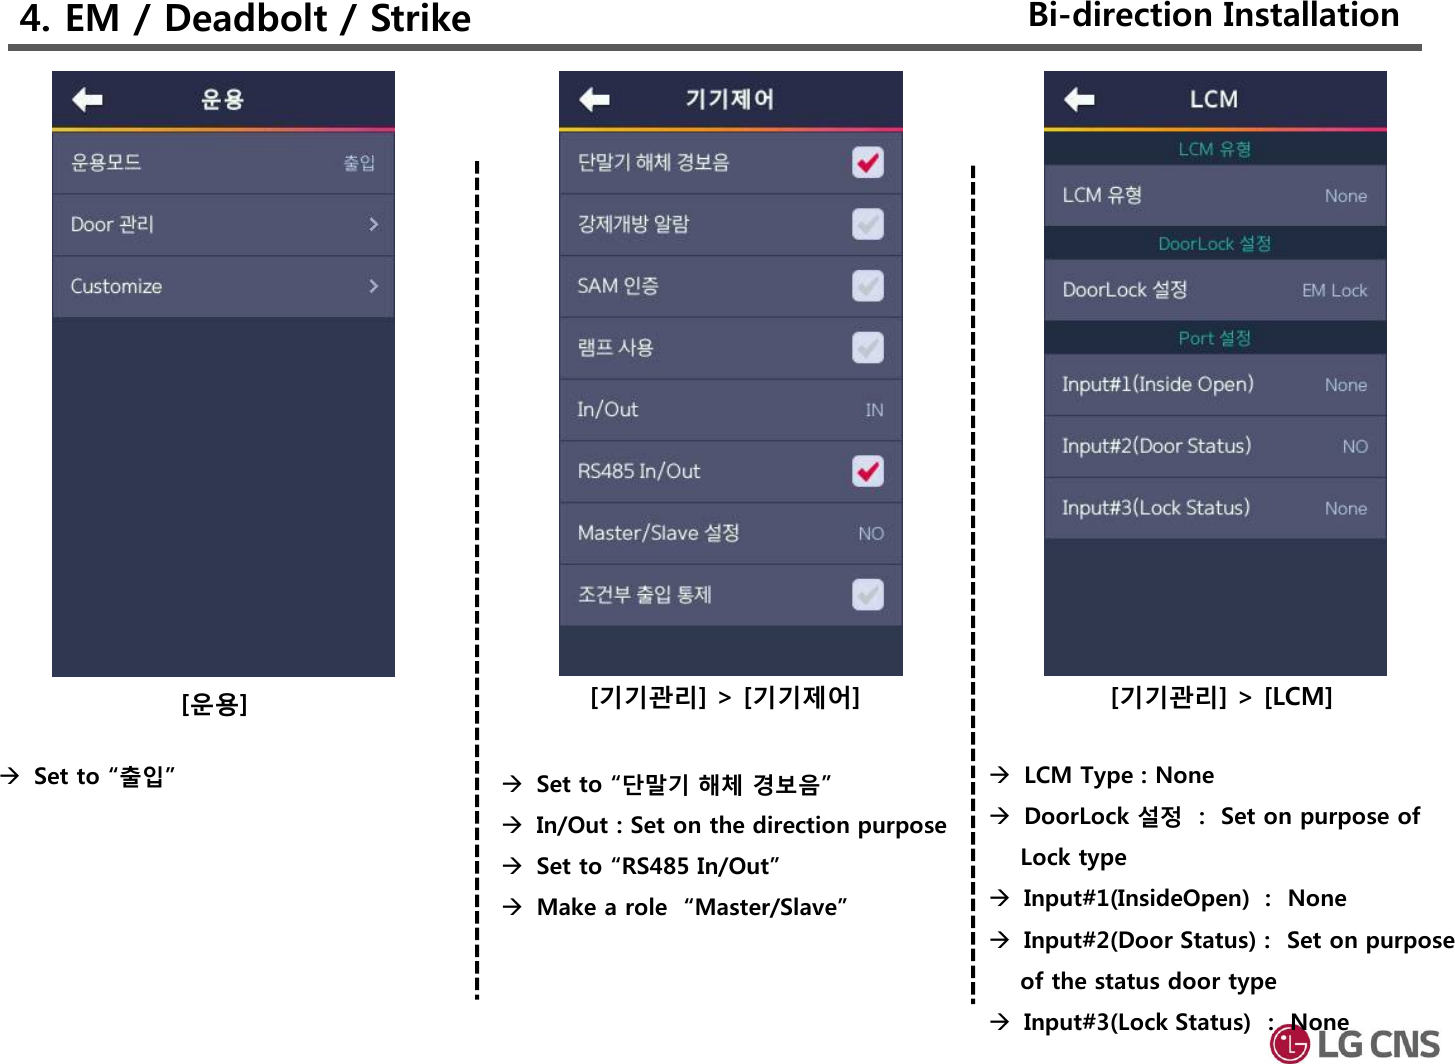 4. EM / Deadbolt / Strike[기기관리] &gt; [기기제어] [기기관리] &gt; [LCM][운용]Set to “출입”  Set to “단말기 해체 경보음”In/Out : Set on the direction purposeSet to “RS485 In/Out” Make a role  “Master/Slave”  LCM Type : NoneDoorLock 설정 :  Set on purpose of Lock typeInput#1(InsideOpen) :  NoneInput#2(Door Status) :  Set on purpose of the status door typeInput#3(Lock Status) :  NoneBi-direction Installation